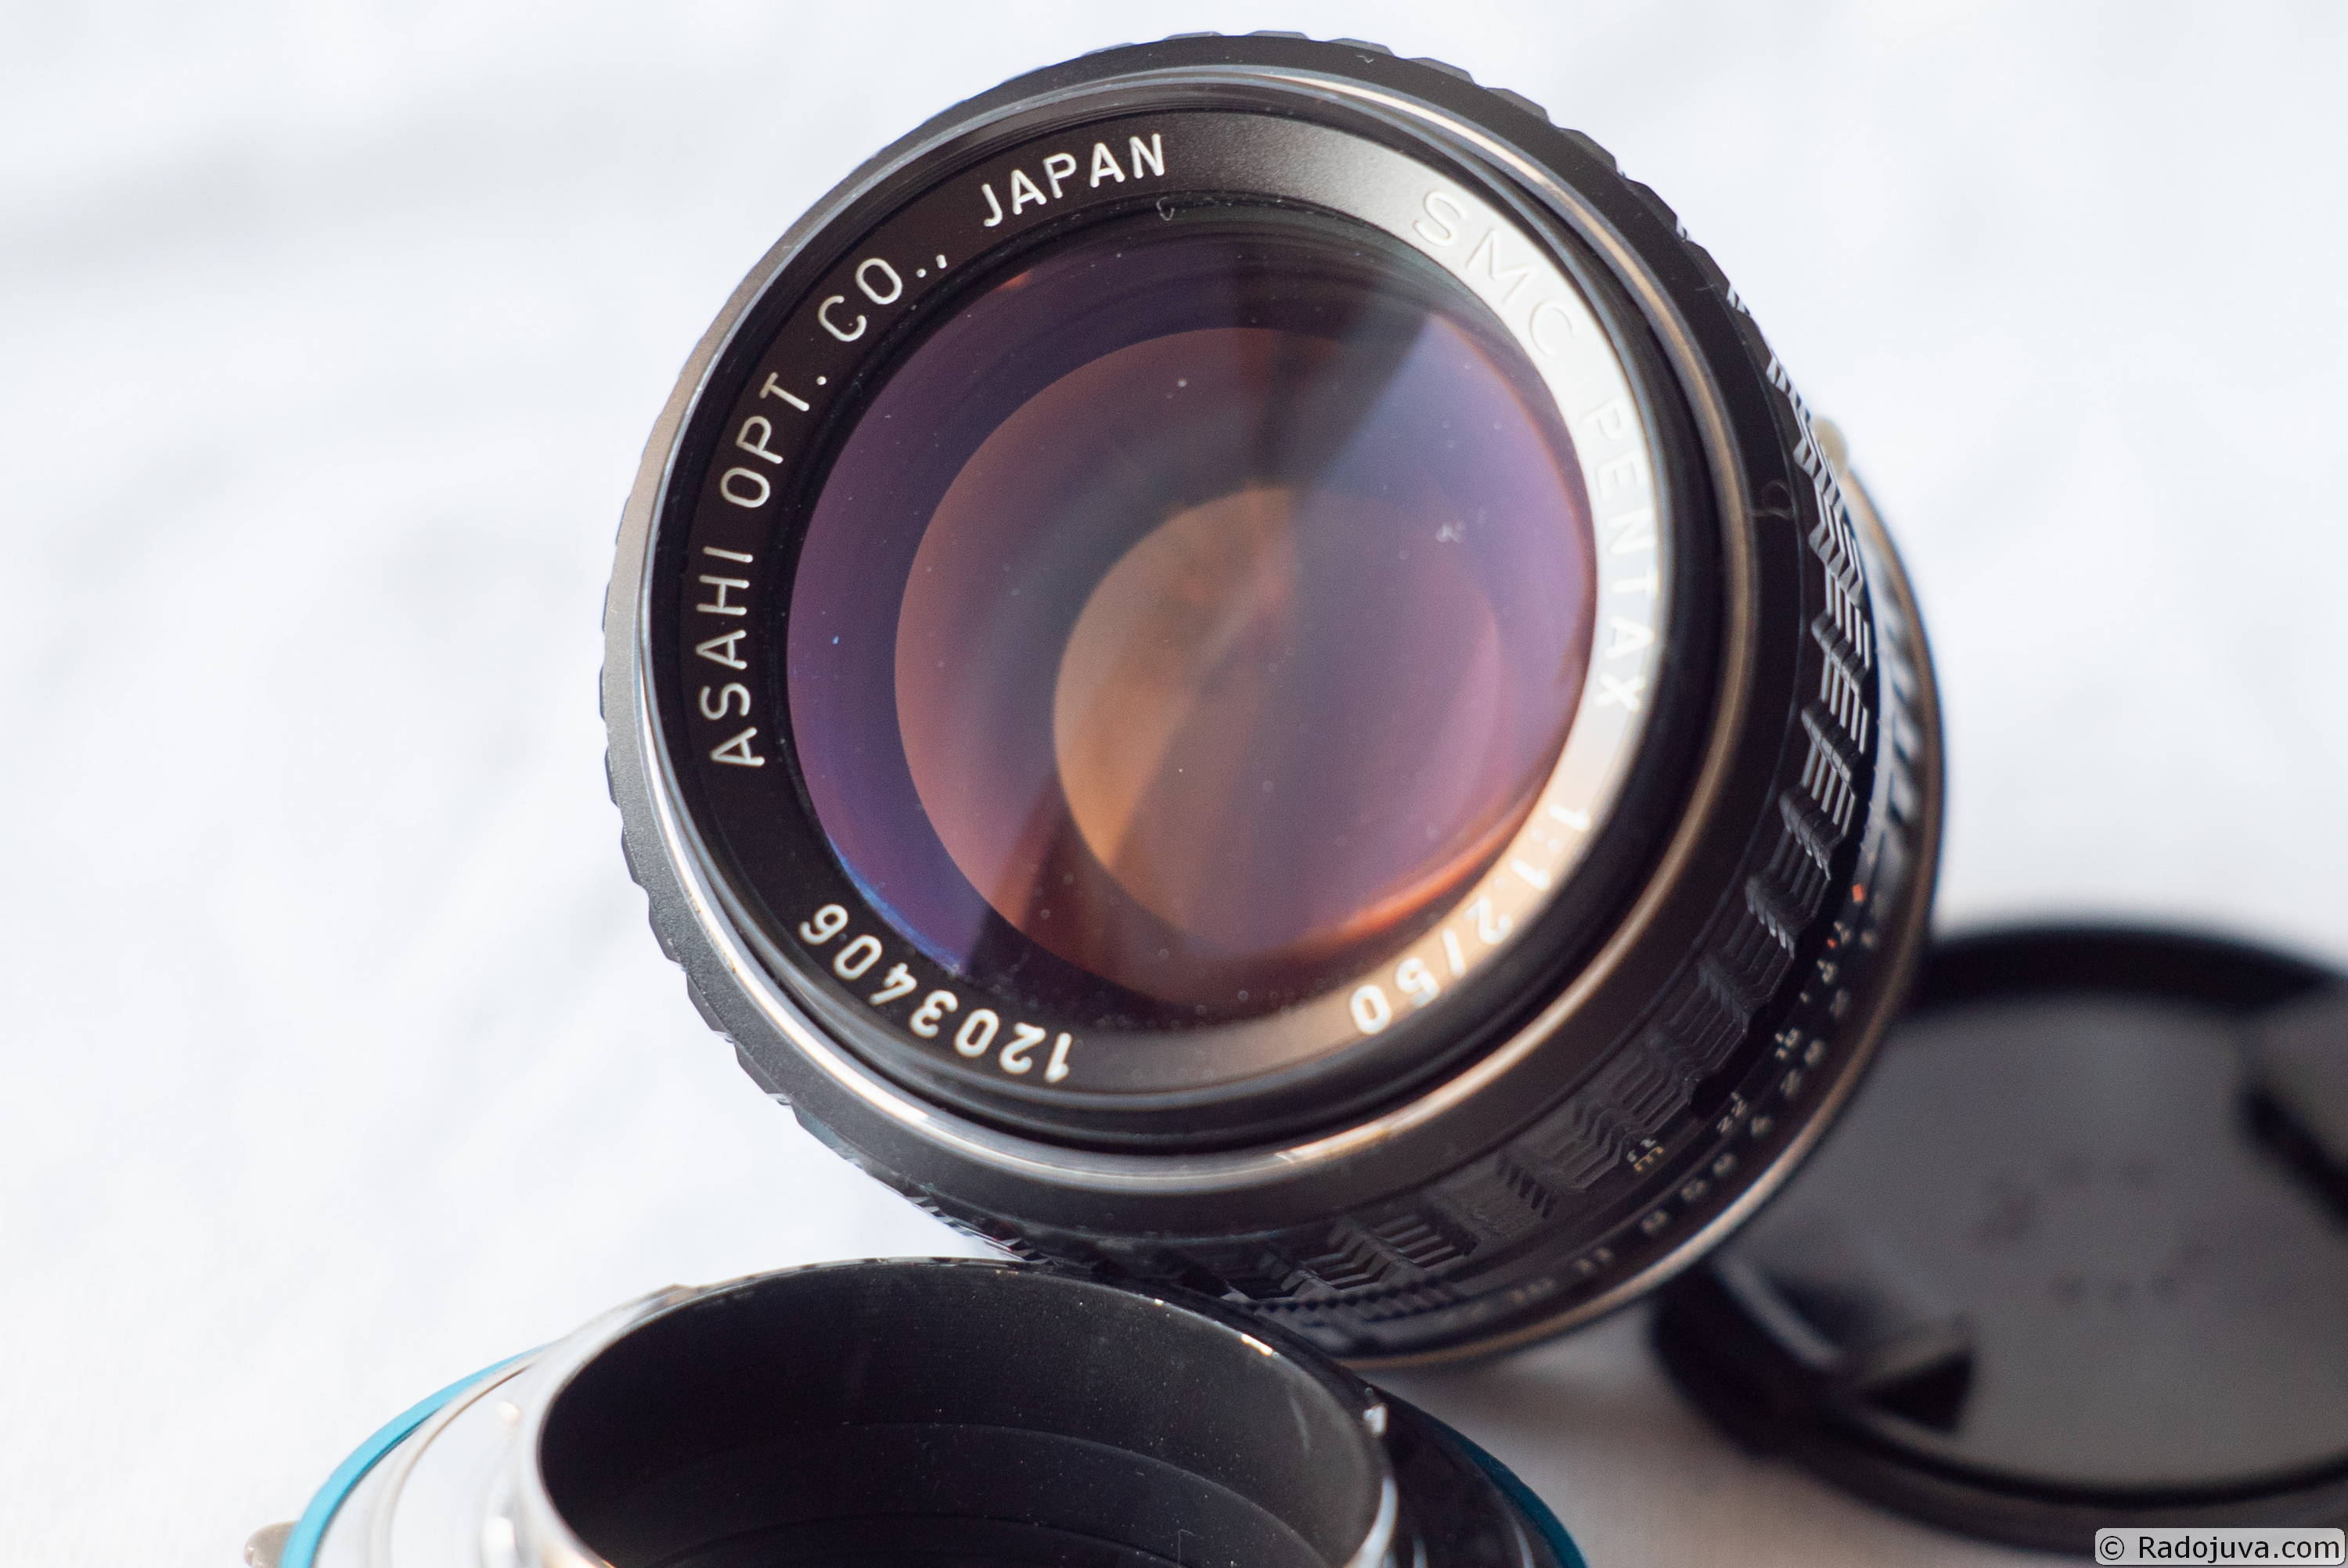 The amber-violet glare of the Pentax 50/1.2 lenses is due to the presence of a multilayer antireflection coating on the objective lenses.